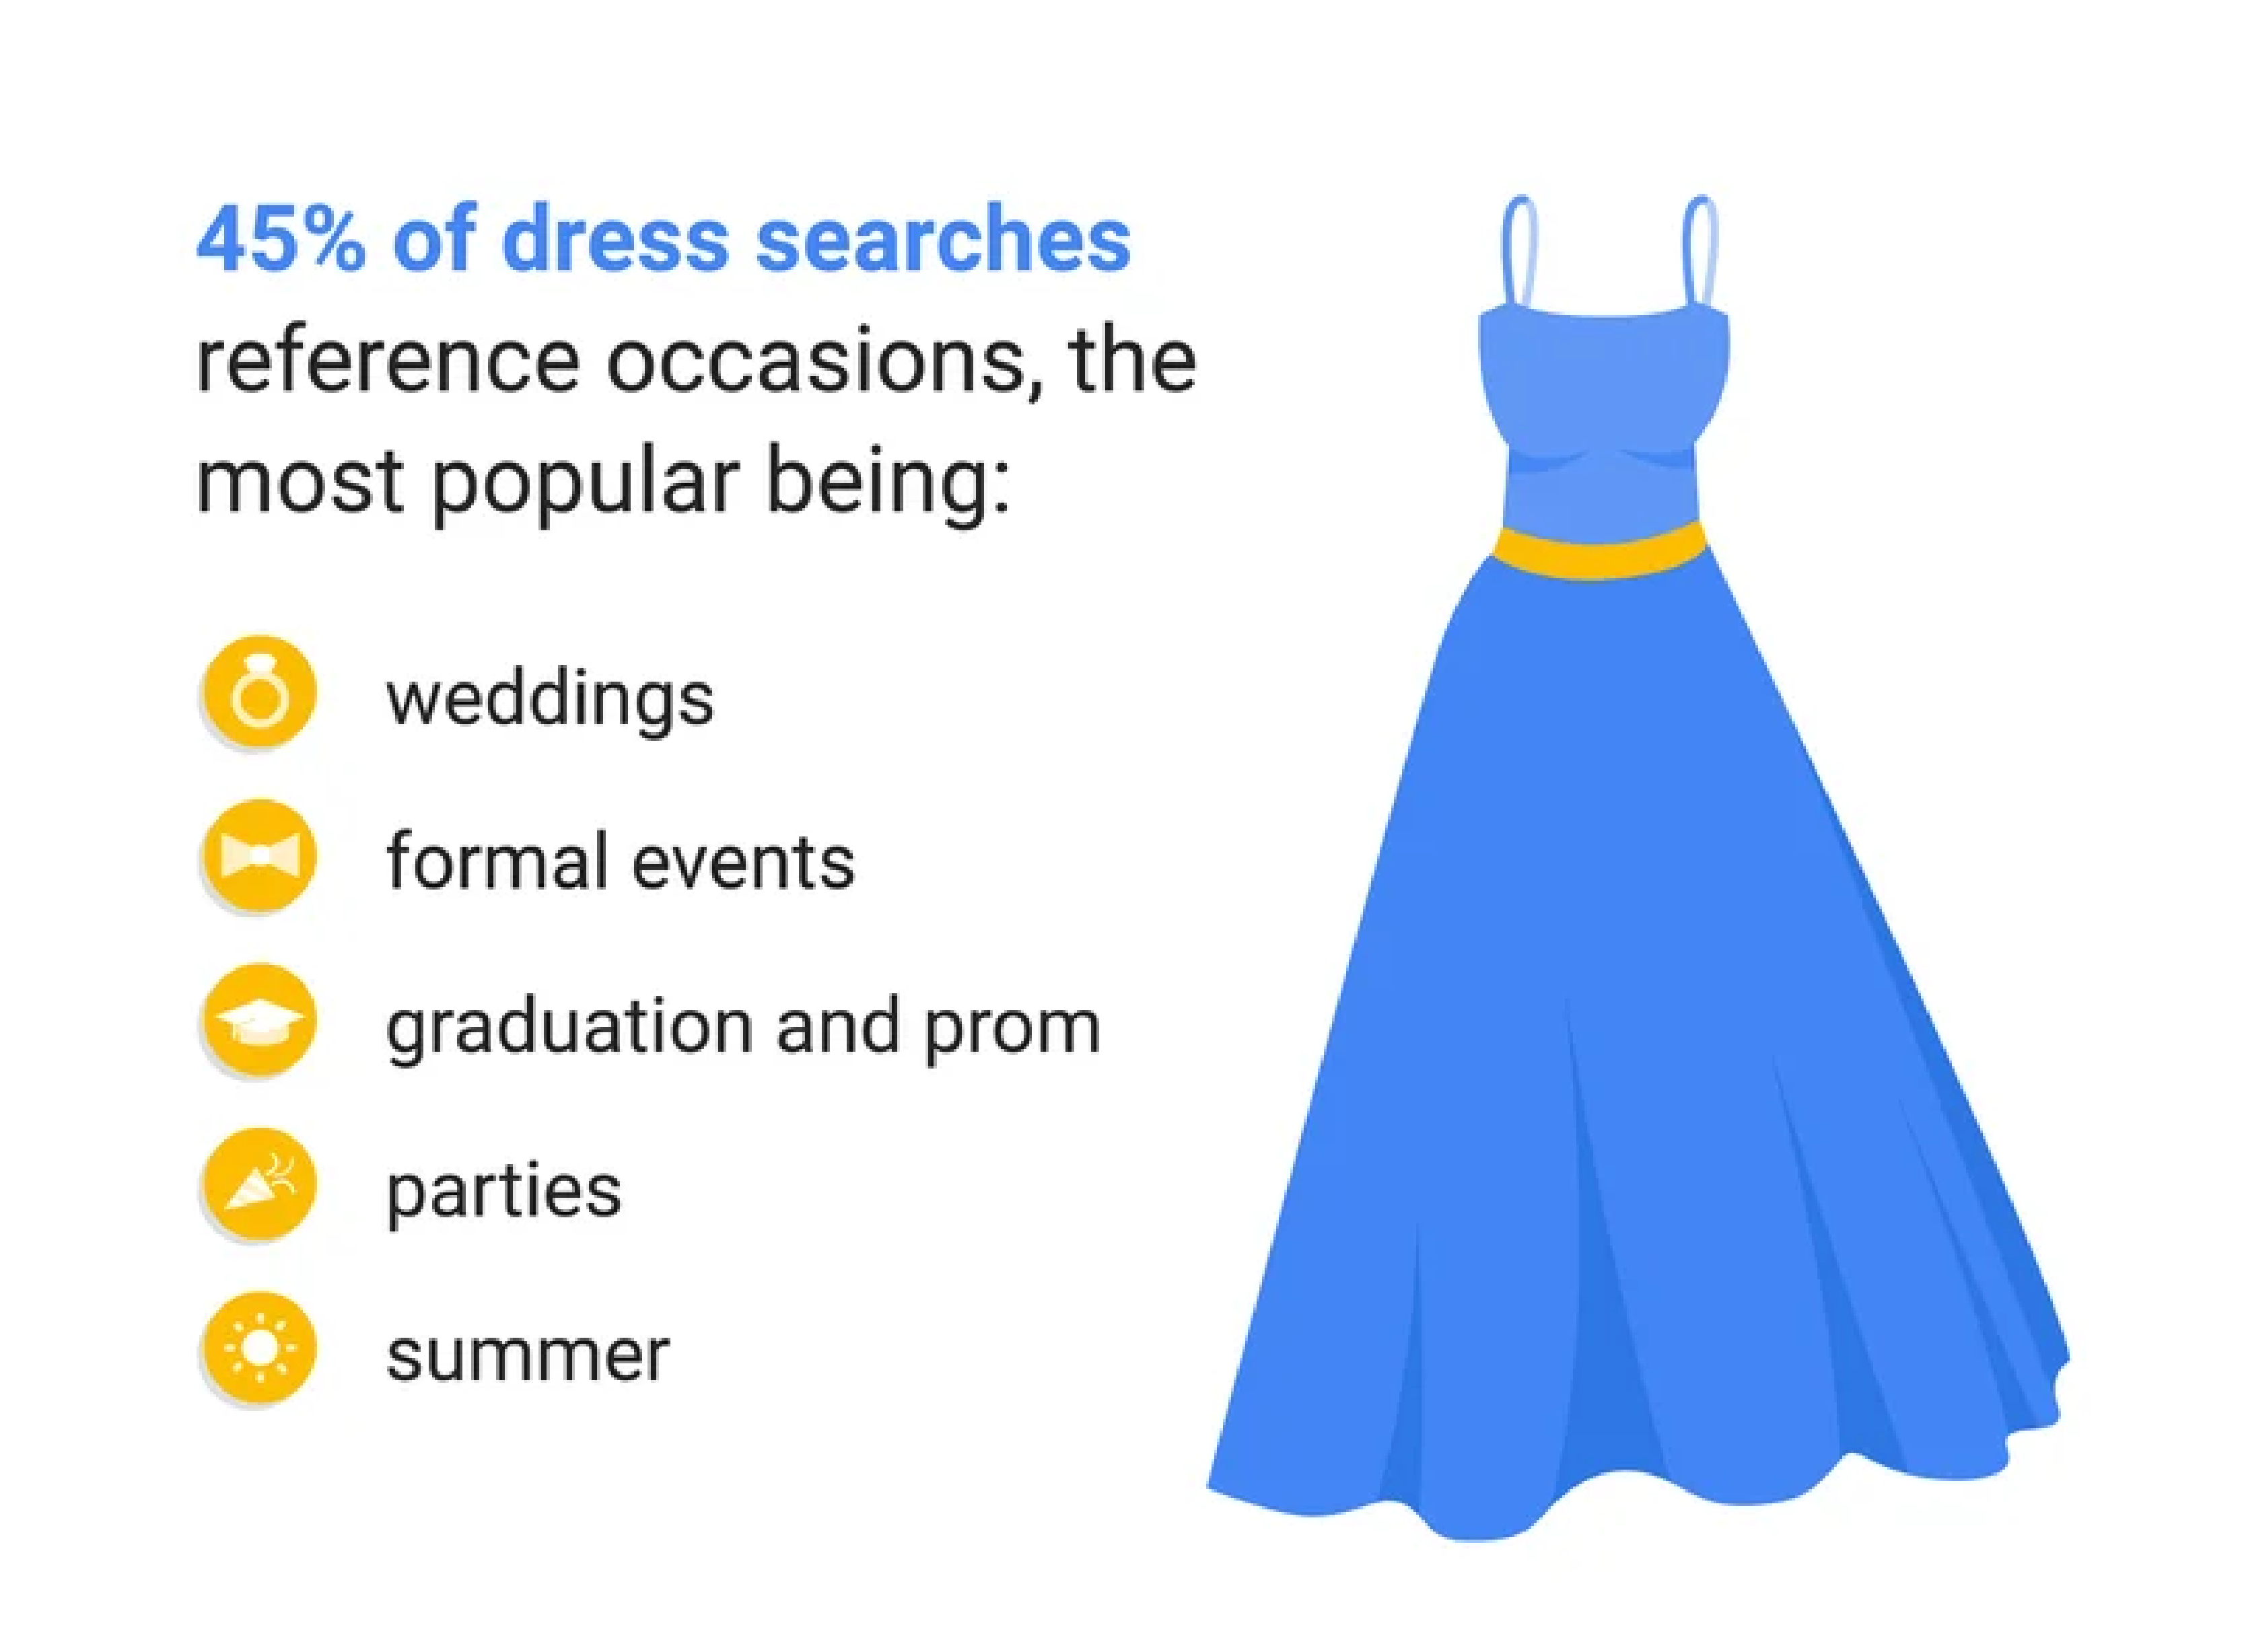 45% of dress searches reference occasions